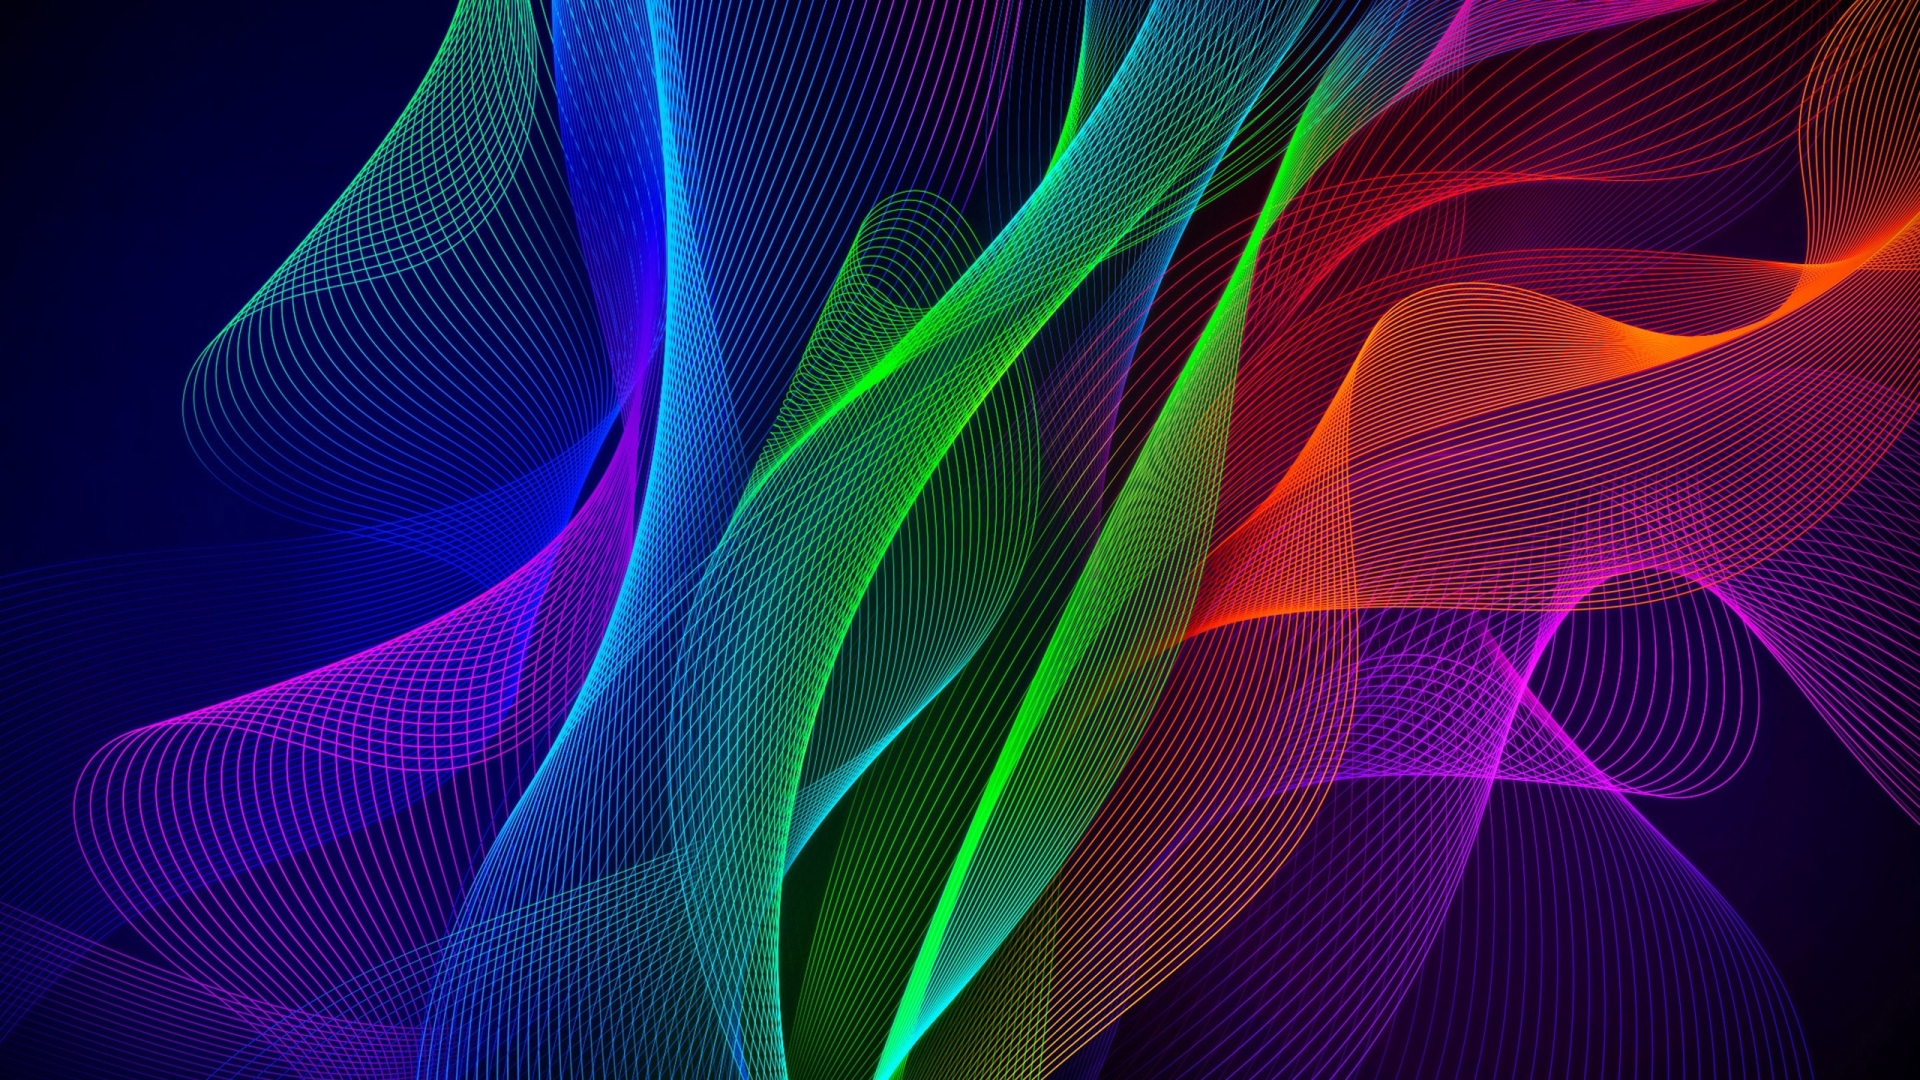 Download wallpaper 7680x4320 abstract, wavy, abstraction art 8k